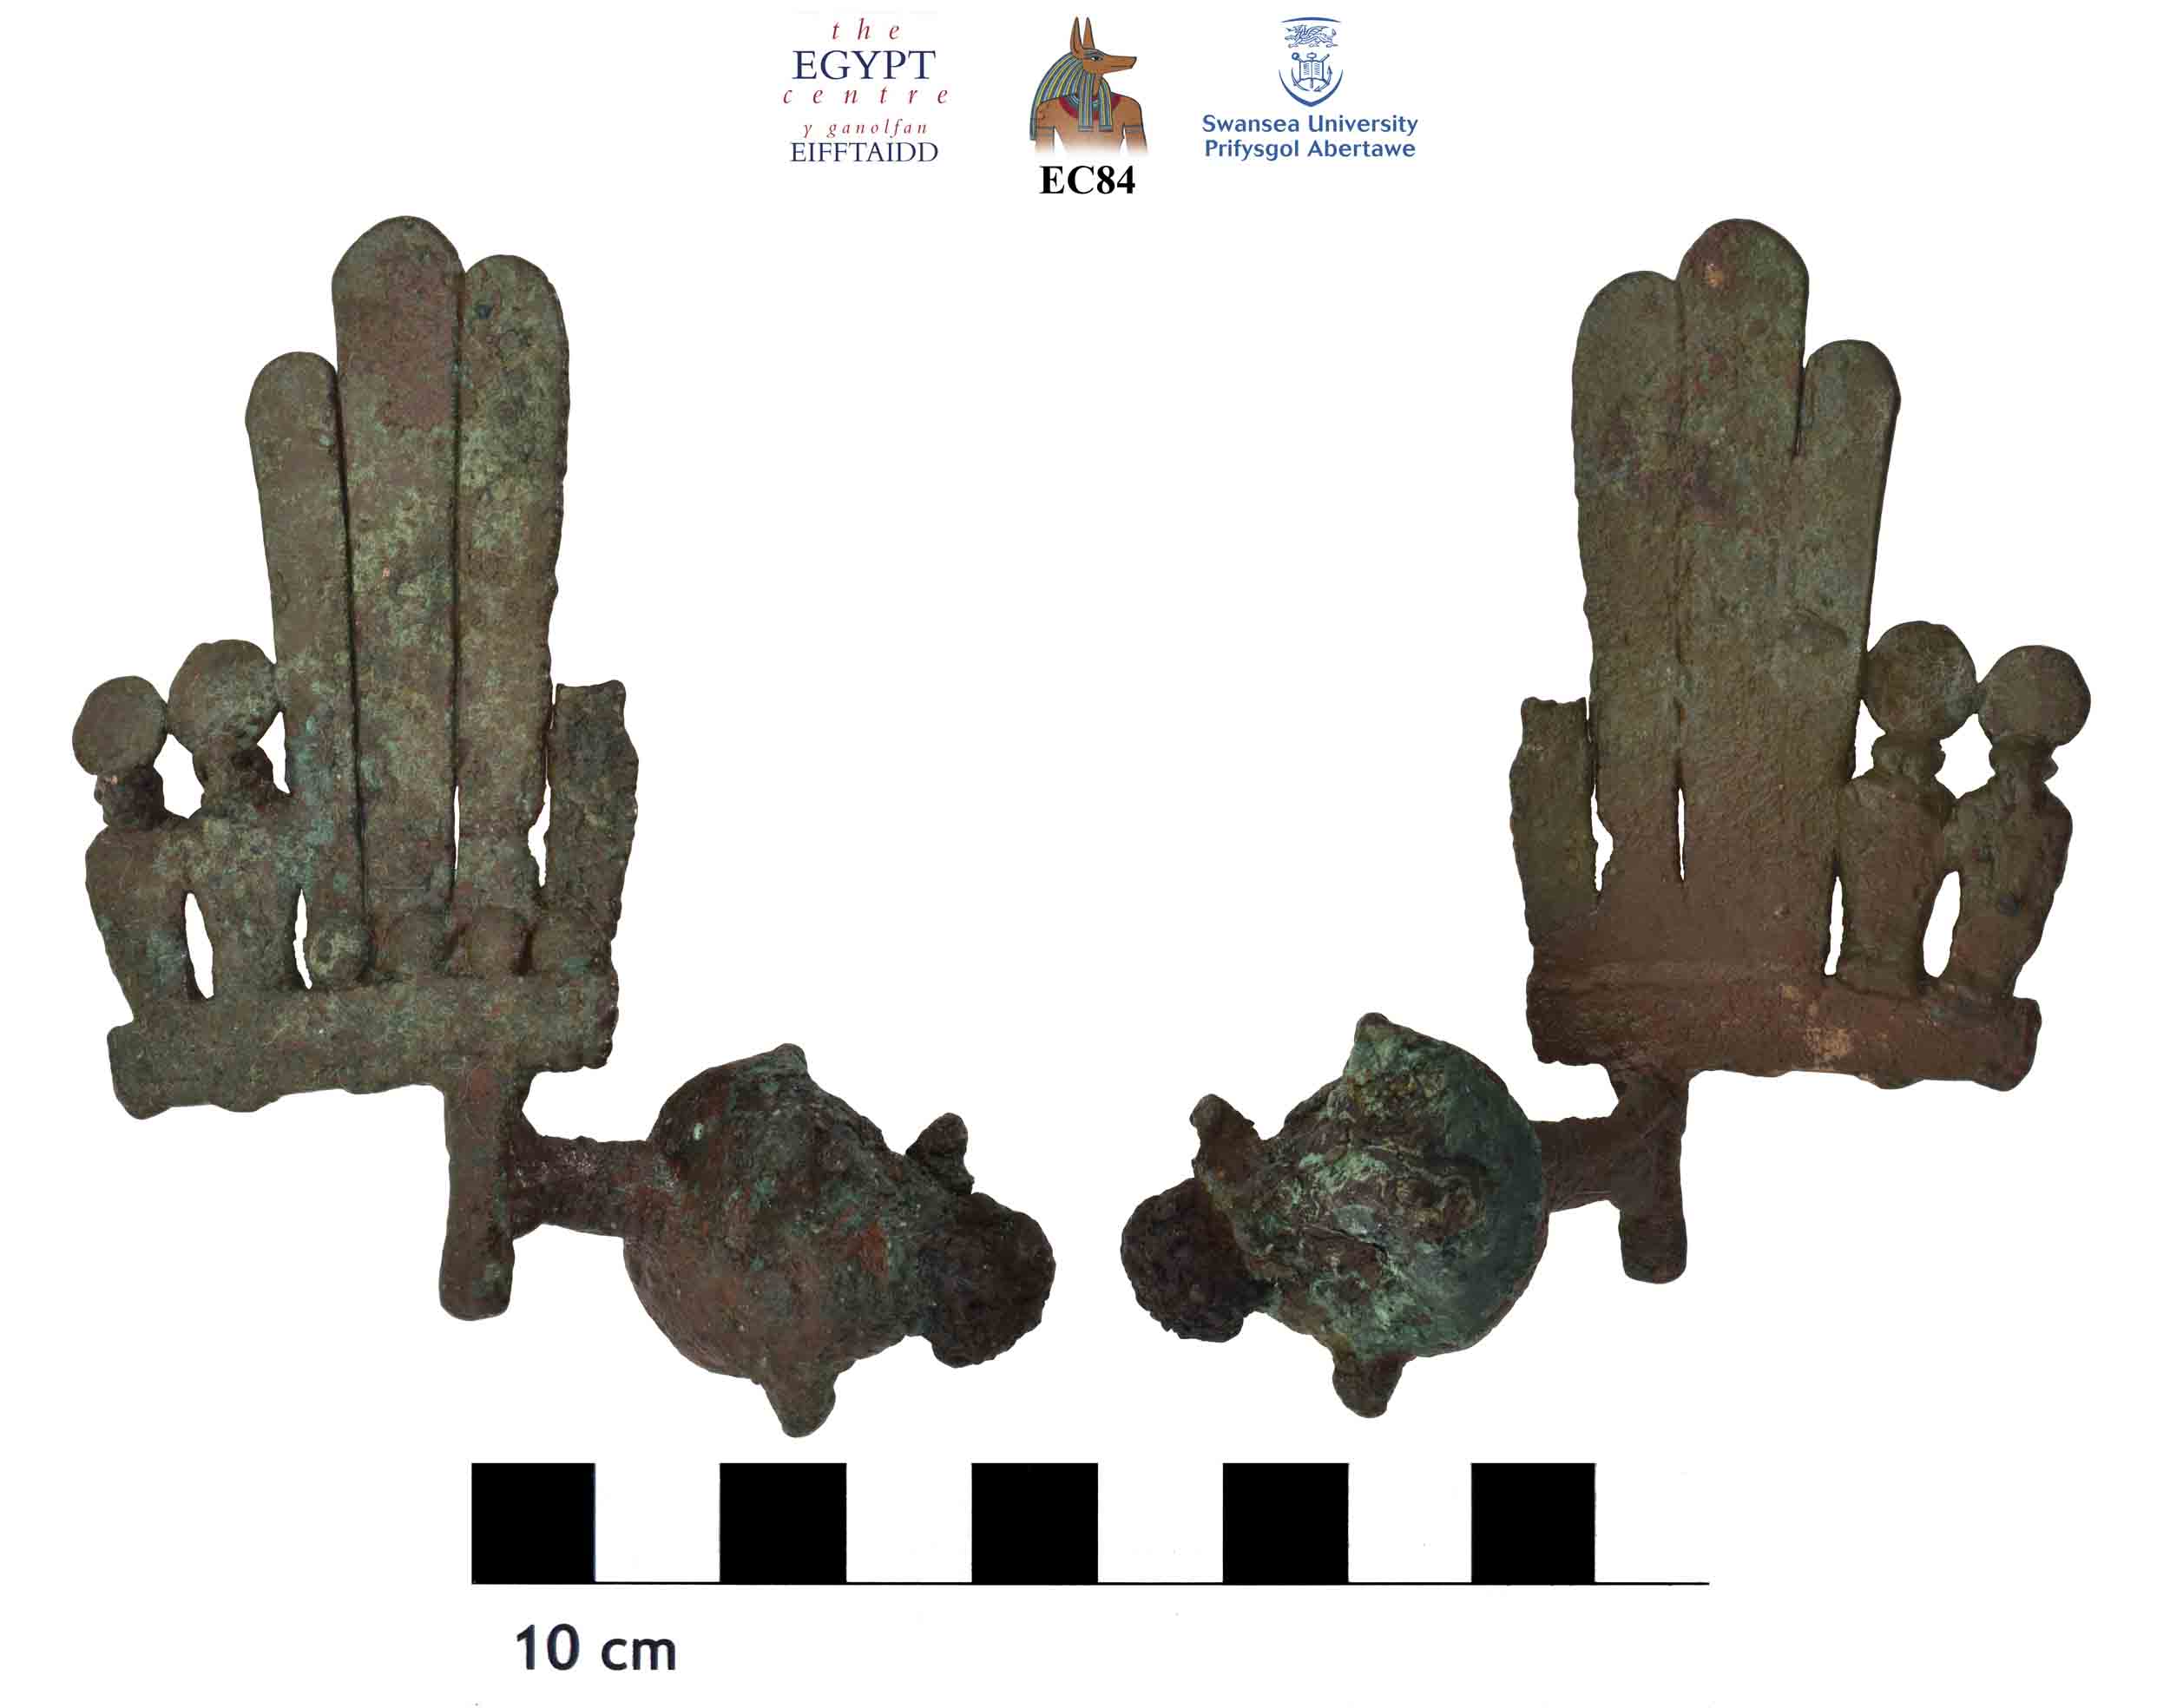 Image for: Copper alloy headdress from a statue